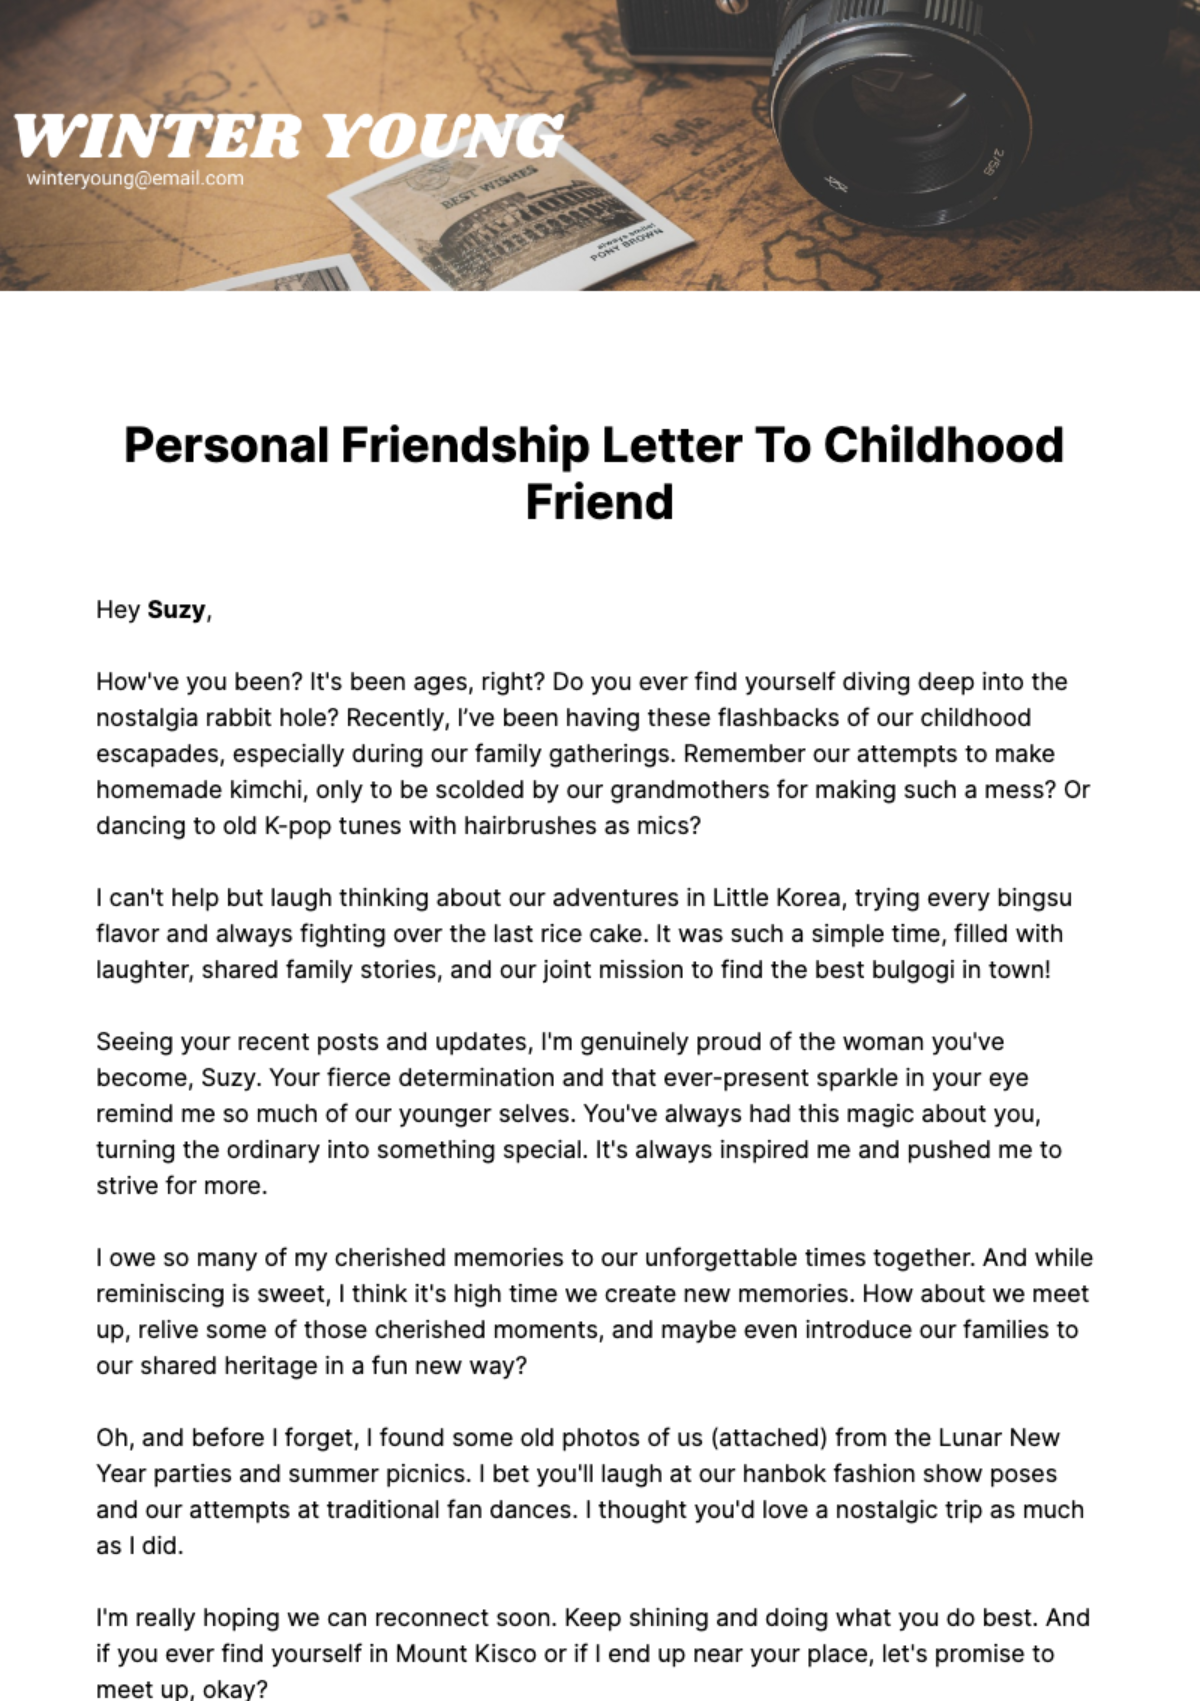 Personal Friendship Letter to Childhood Friend  Template